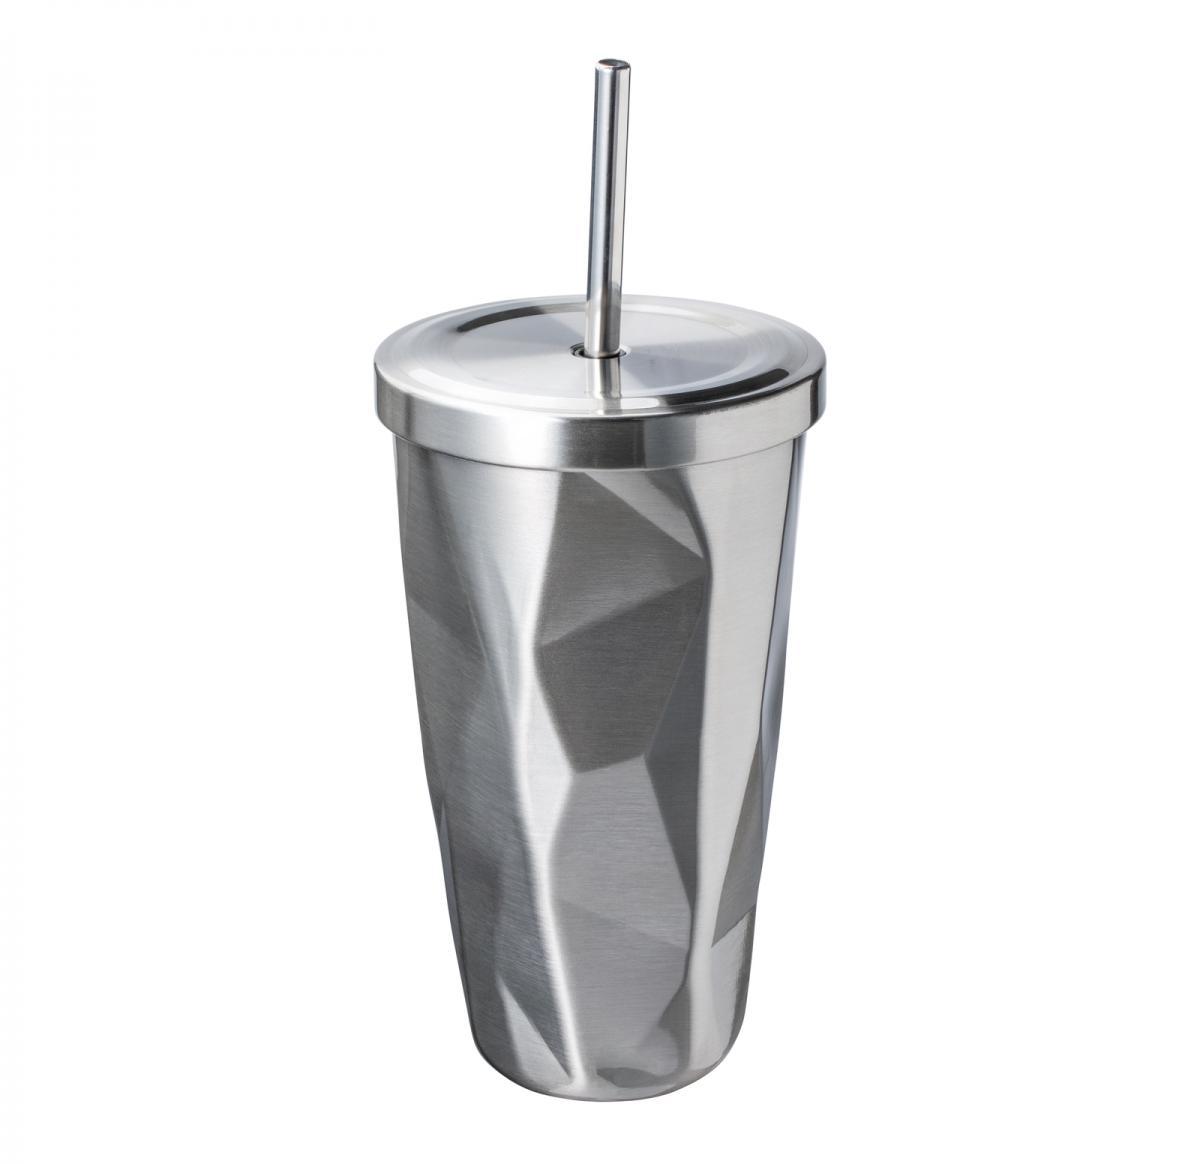 Stainless Steel Mug With Lid And Stainless Steel Straw - 500ml